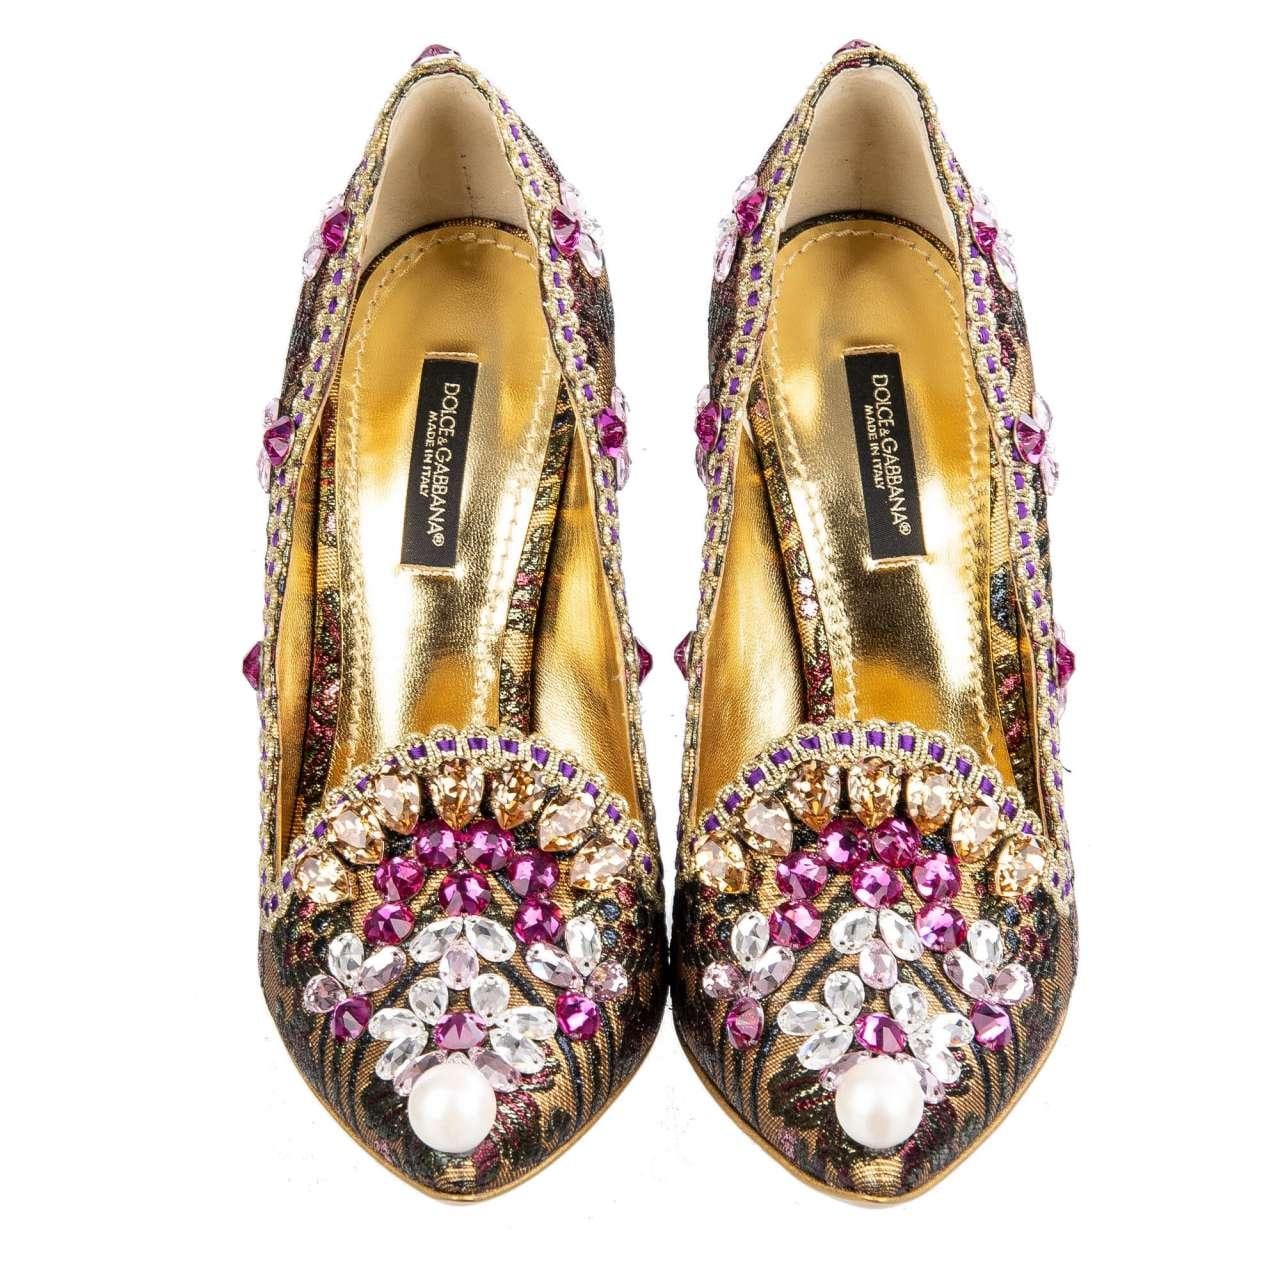 Dolce & Gabbana Lurex Jacquard Crystals Embroidered Pumps ALADINO Gold EUR 36 For Sale 1